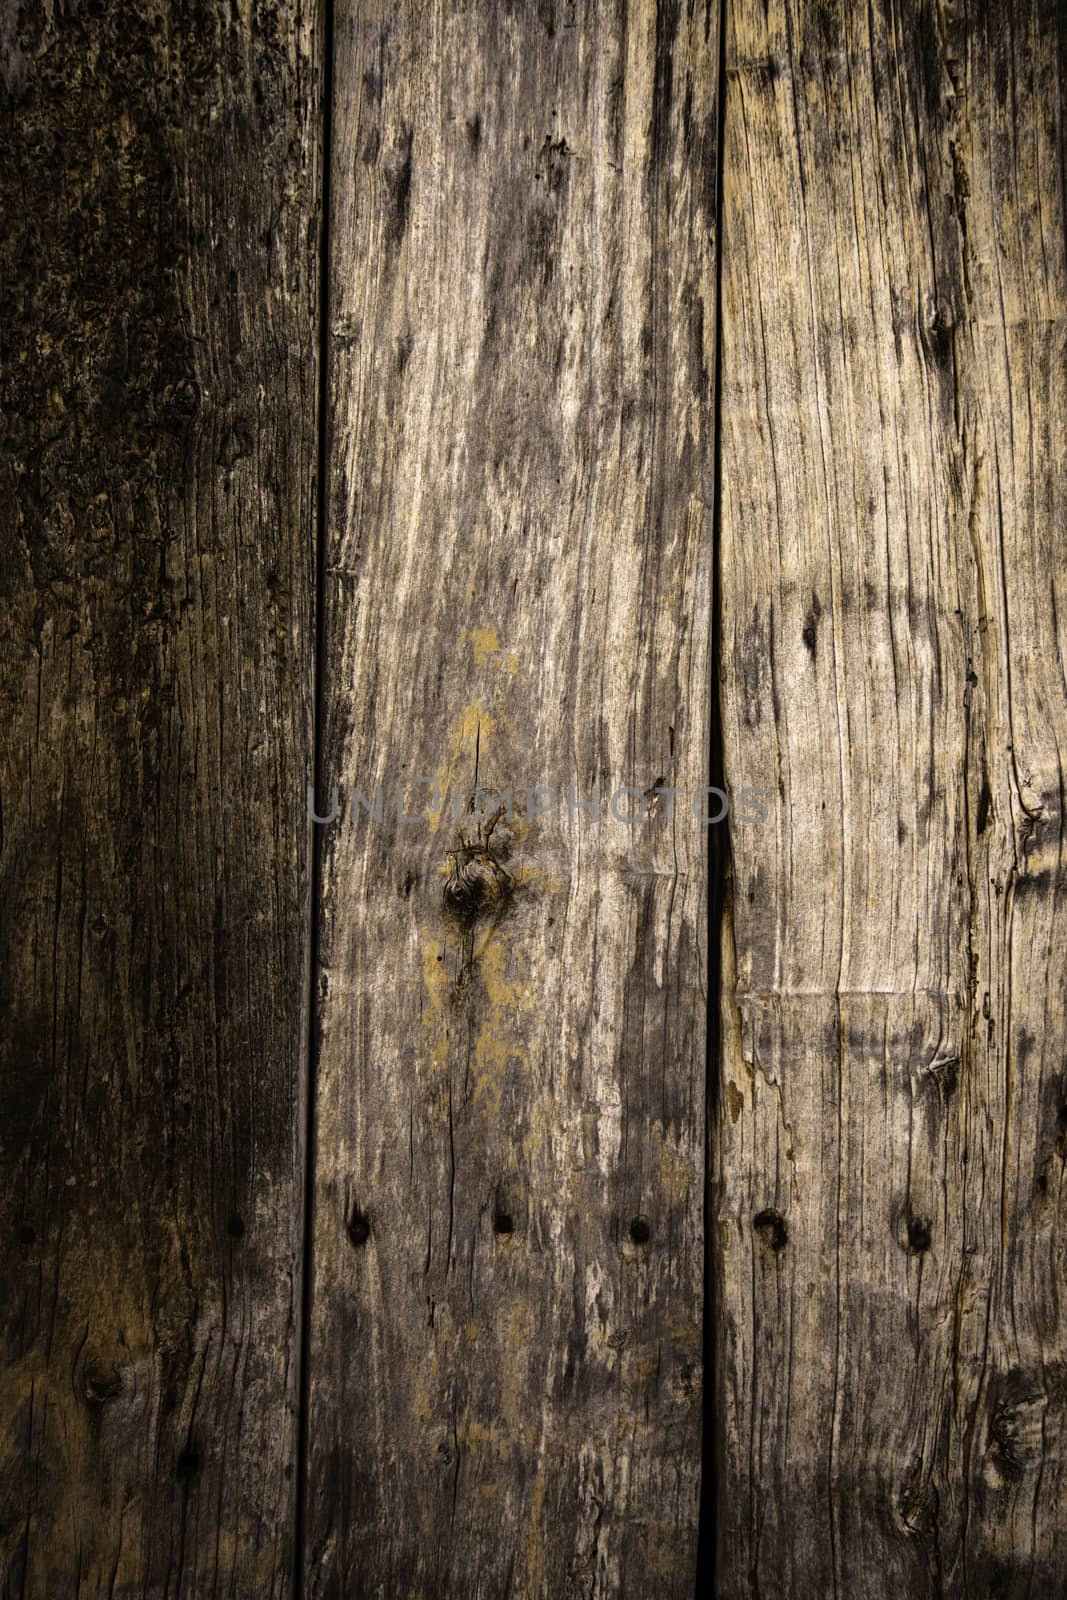 Old spoiled wood, detail of a wall decorated with abandoned wood